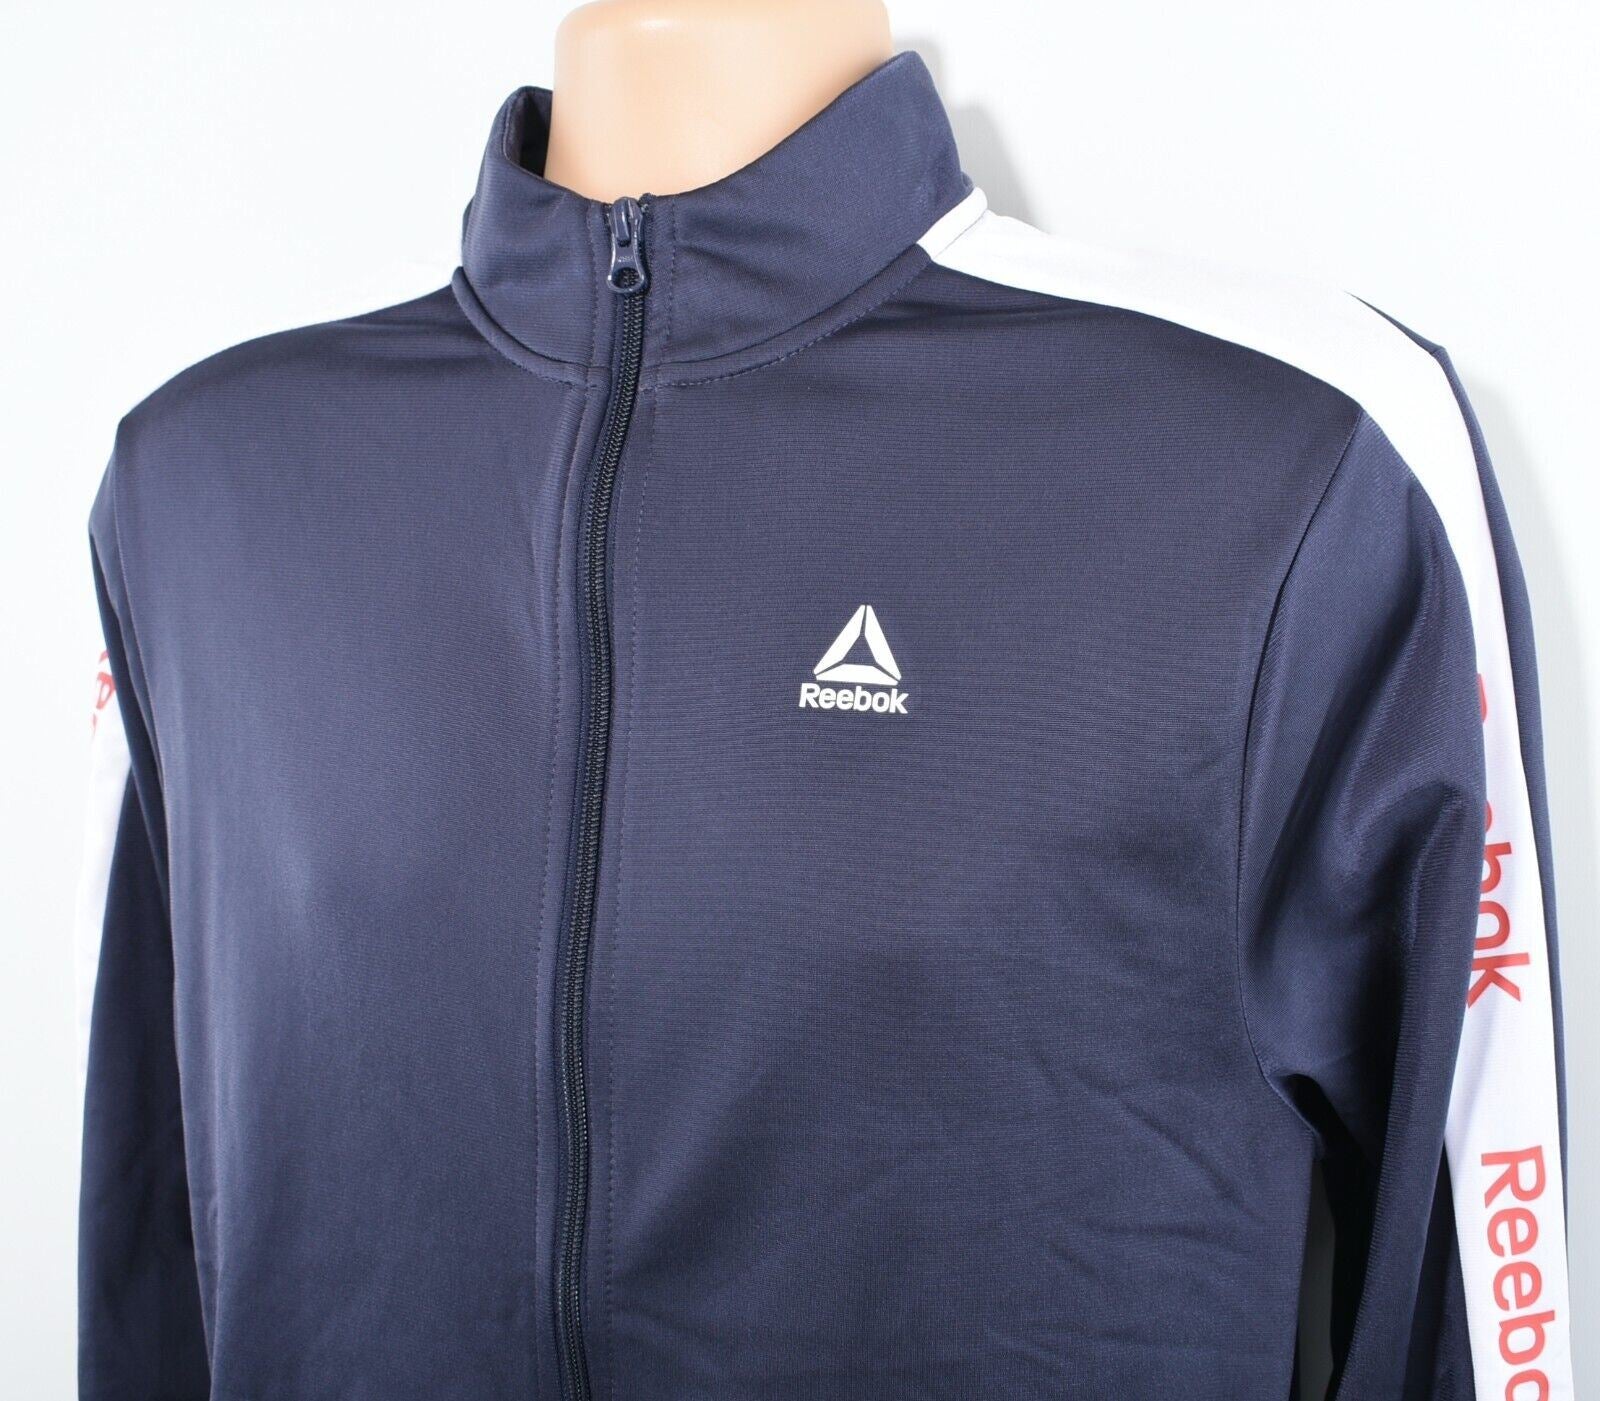 REEBOK Mens Zip Up Track Jacket, Track Top, Heritage Navy, size SMALL